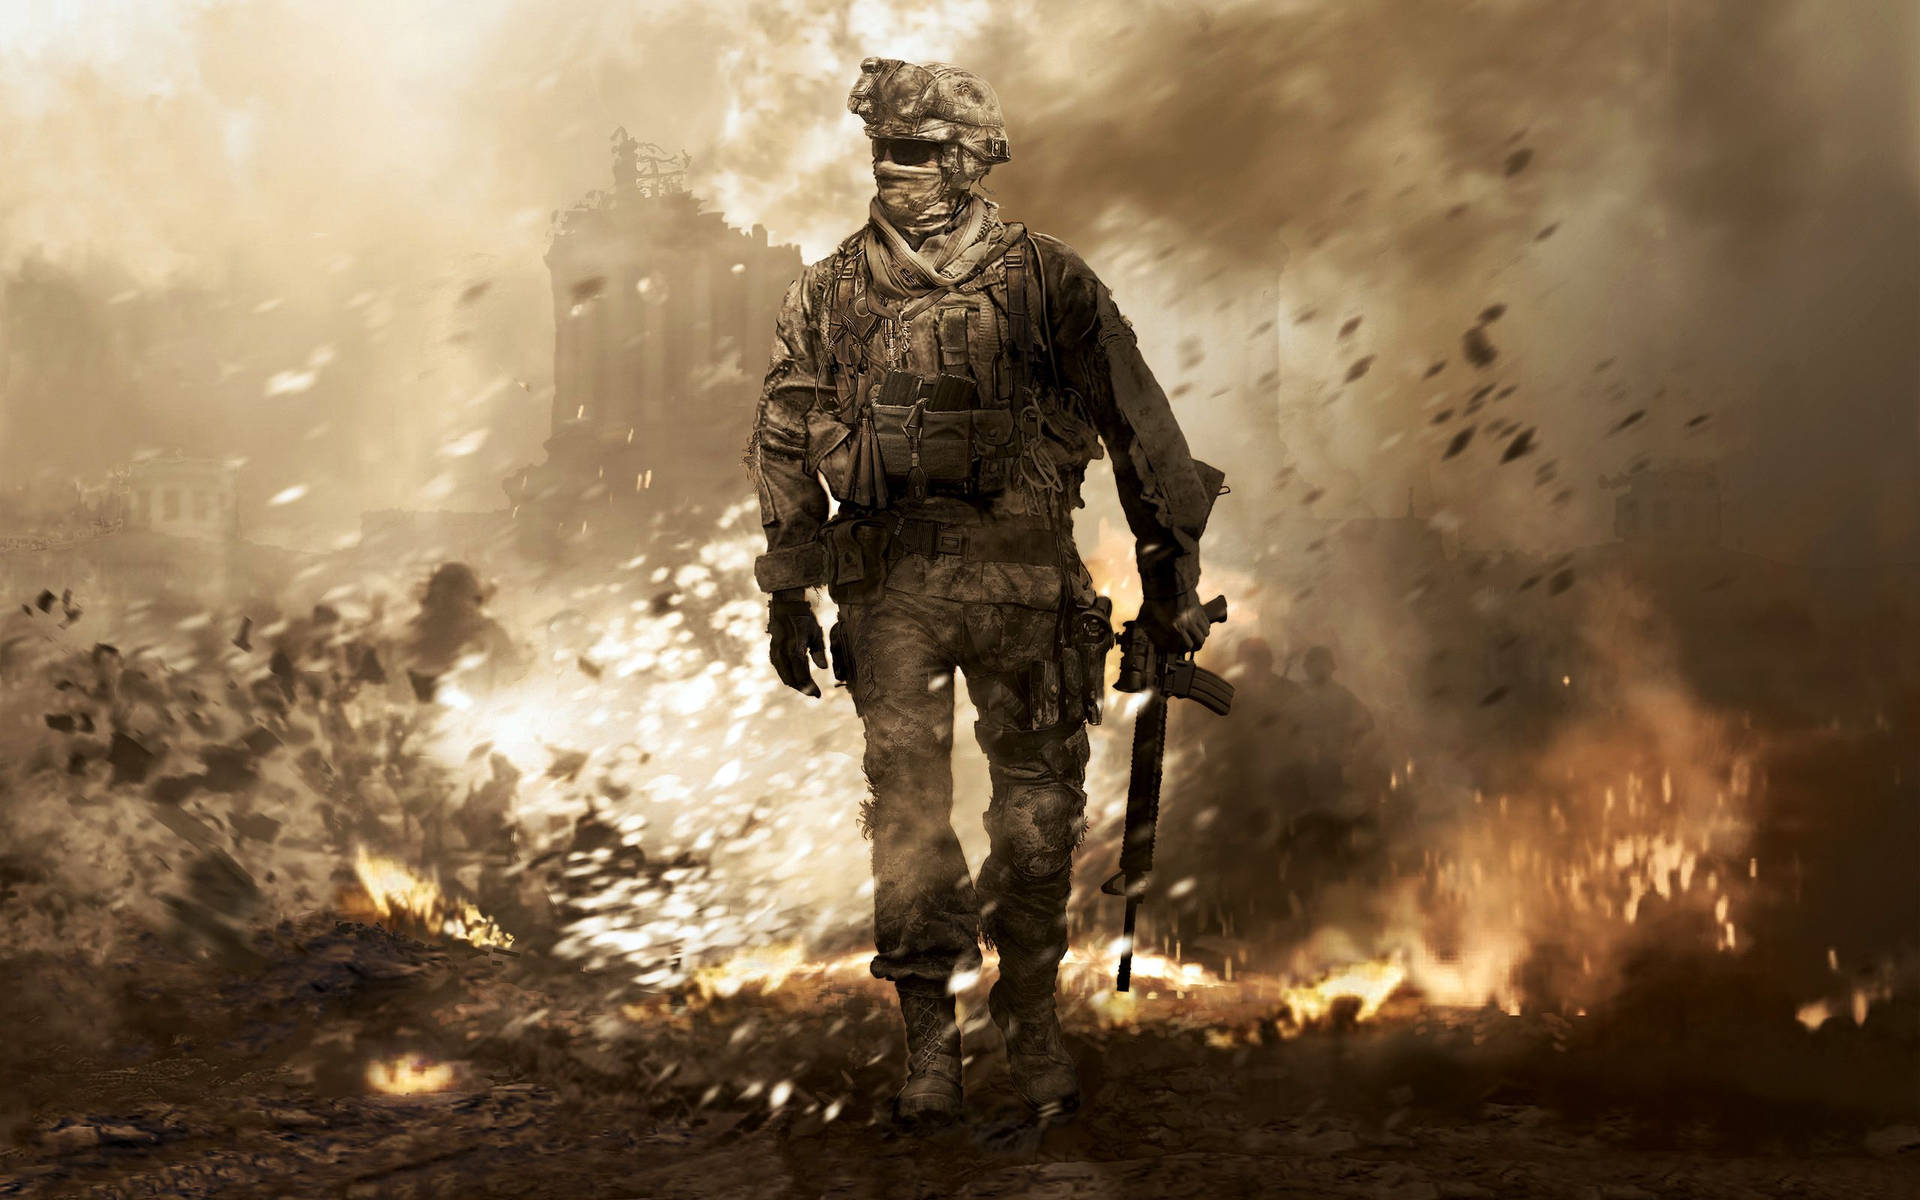 Brave Soldier Facing Down the Enemy in Call of Duty Wallpaper